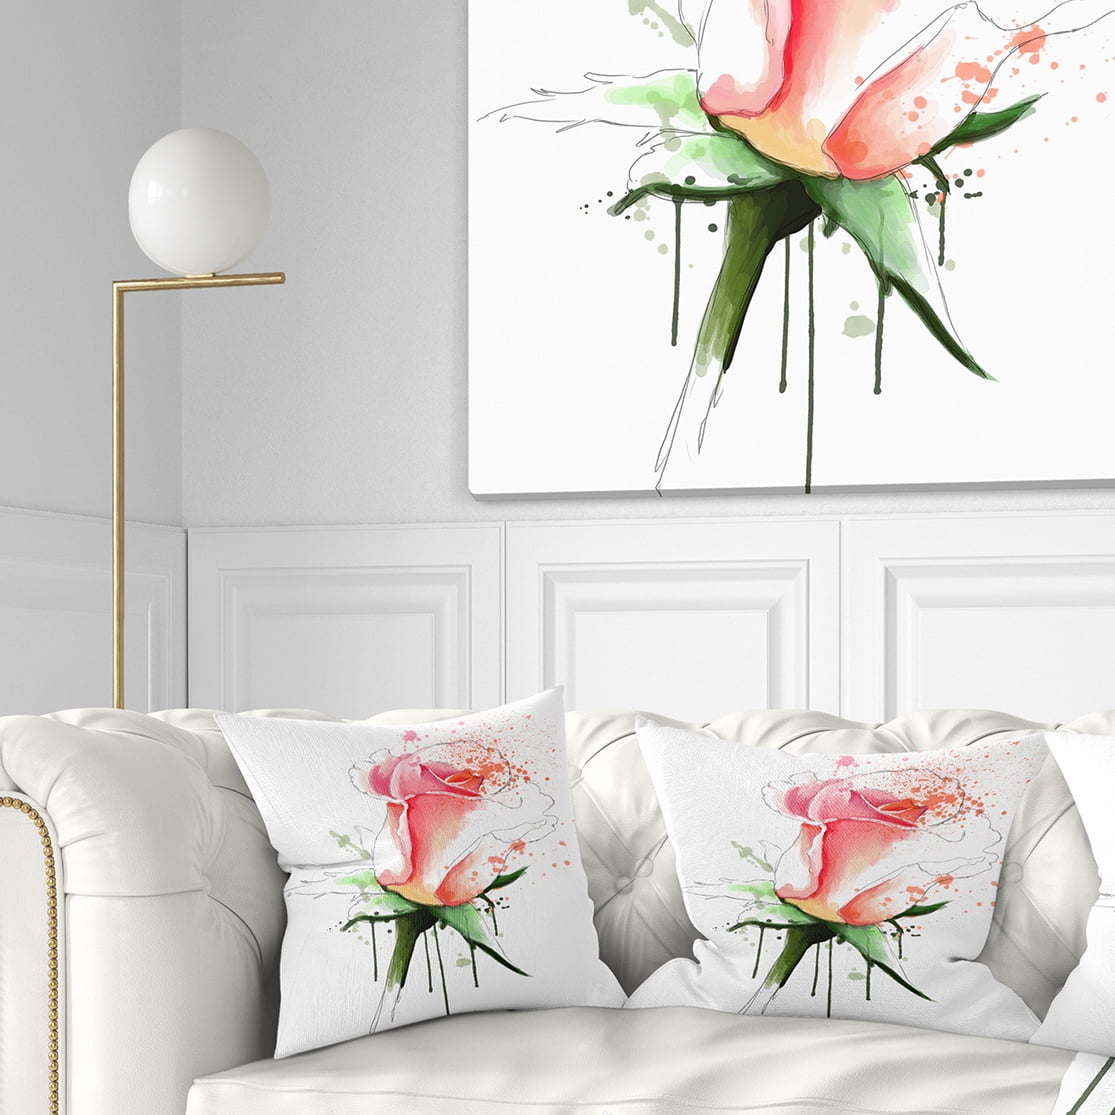 Sofa Throw Pillow 16 Designart CU13748-16-16-C Bunch of Amaryllis Flowers Drawing Floral Round Cushion Cover for Living Room